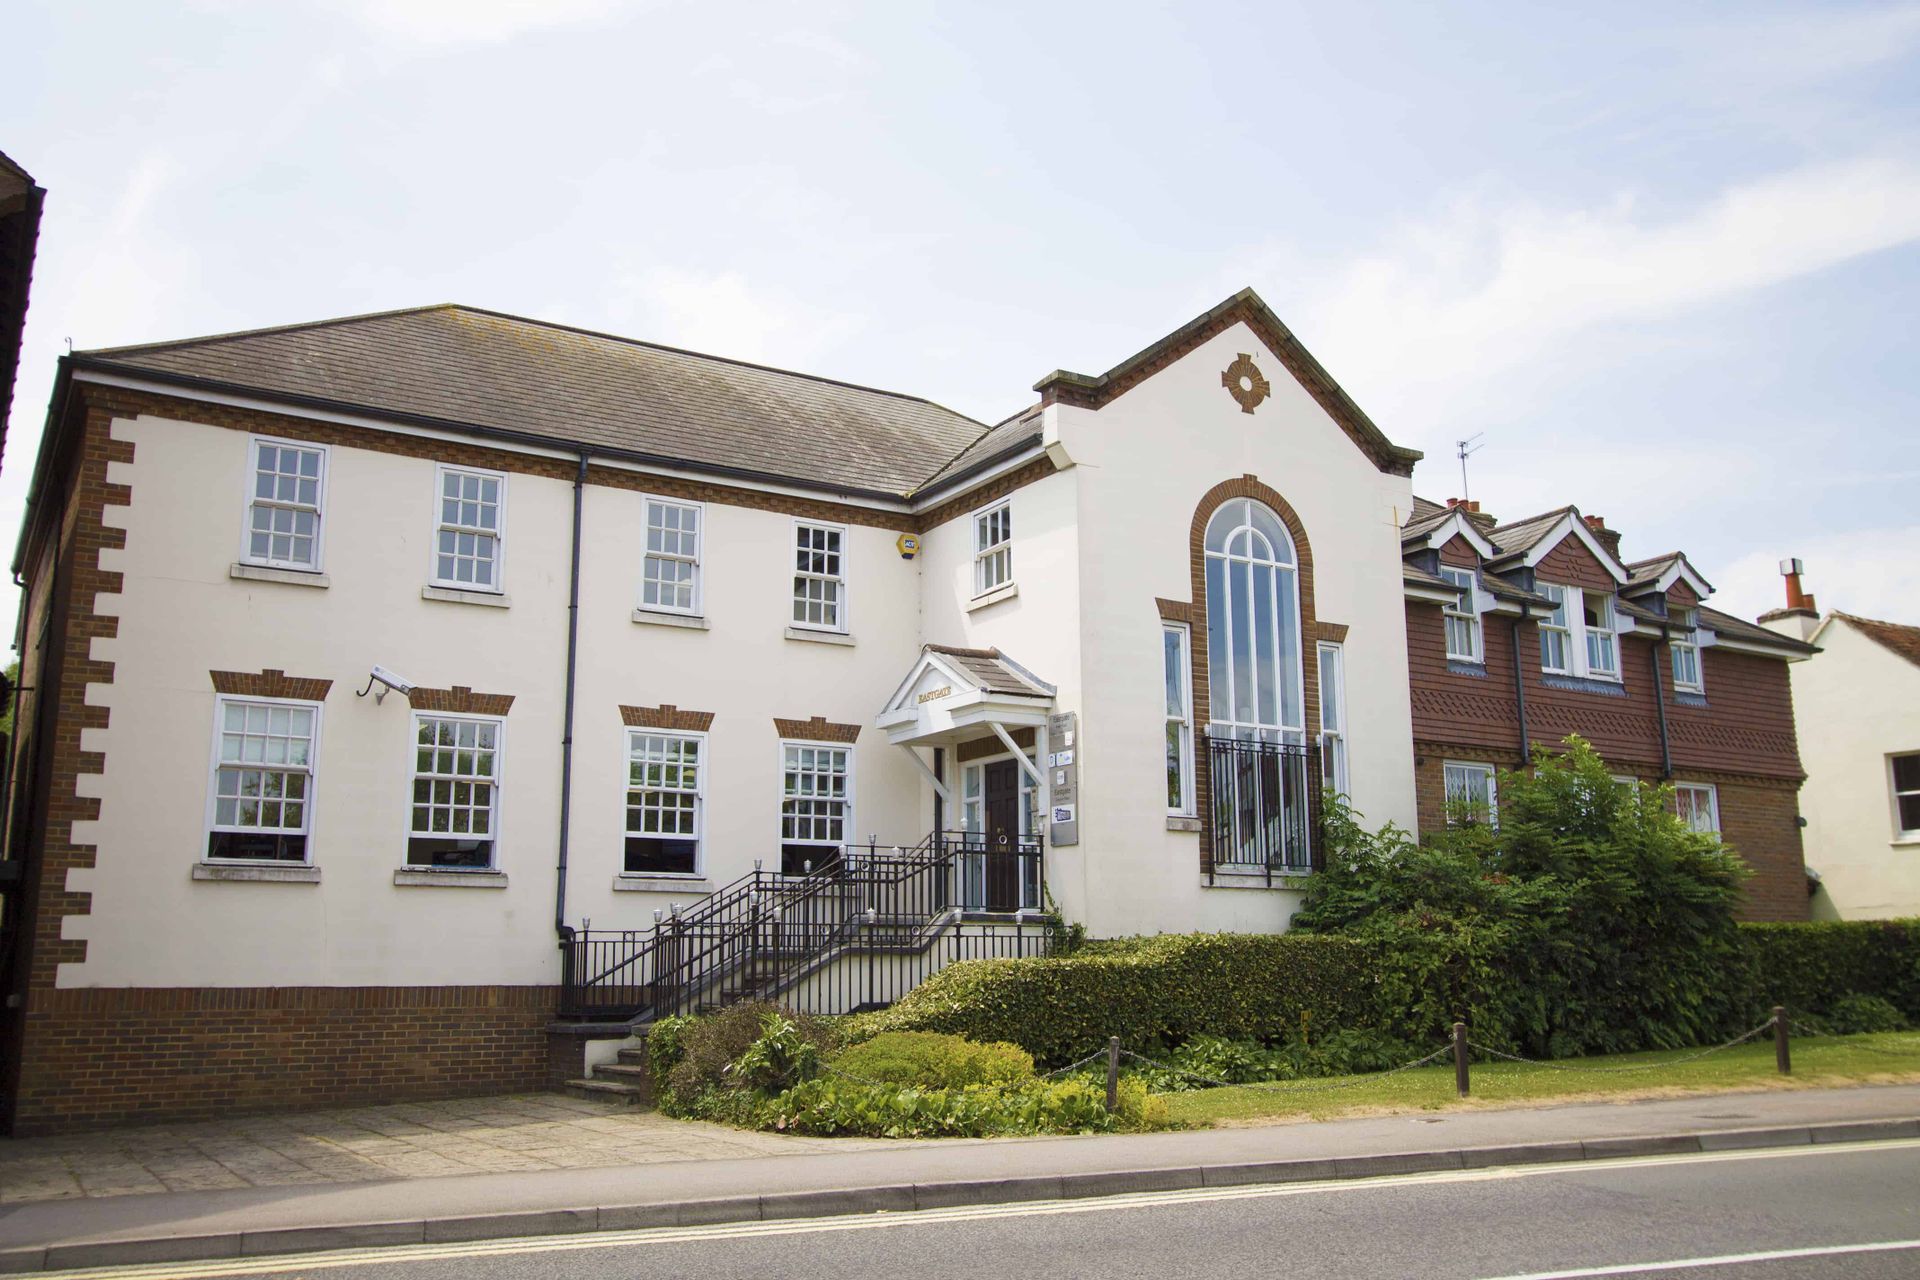 Offices for 2 people in Farnham